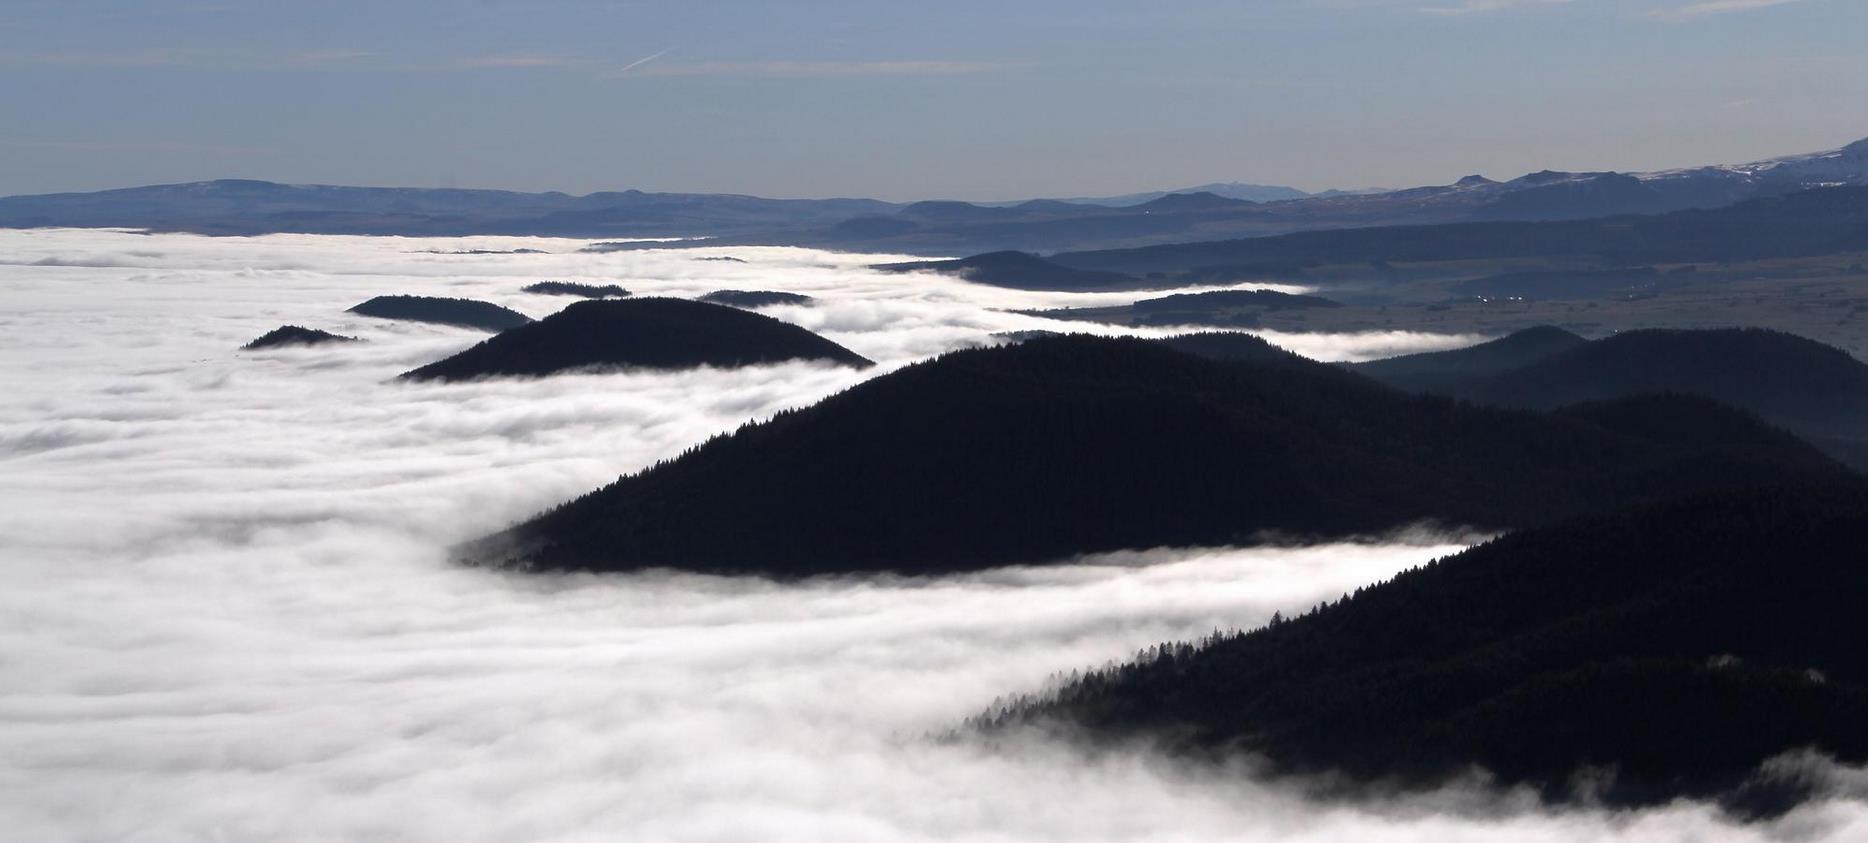 Sea of clouds on the Volcanoes of Auvergne